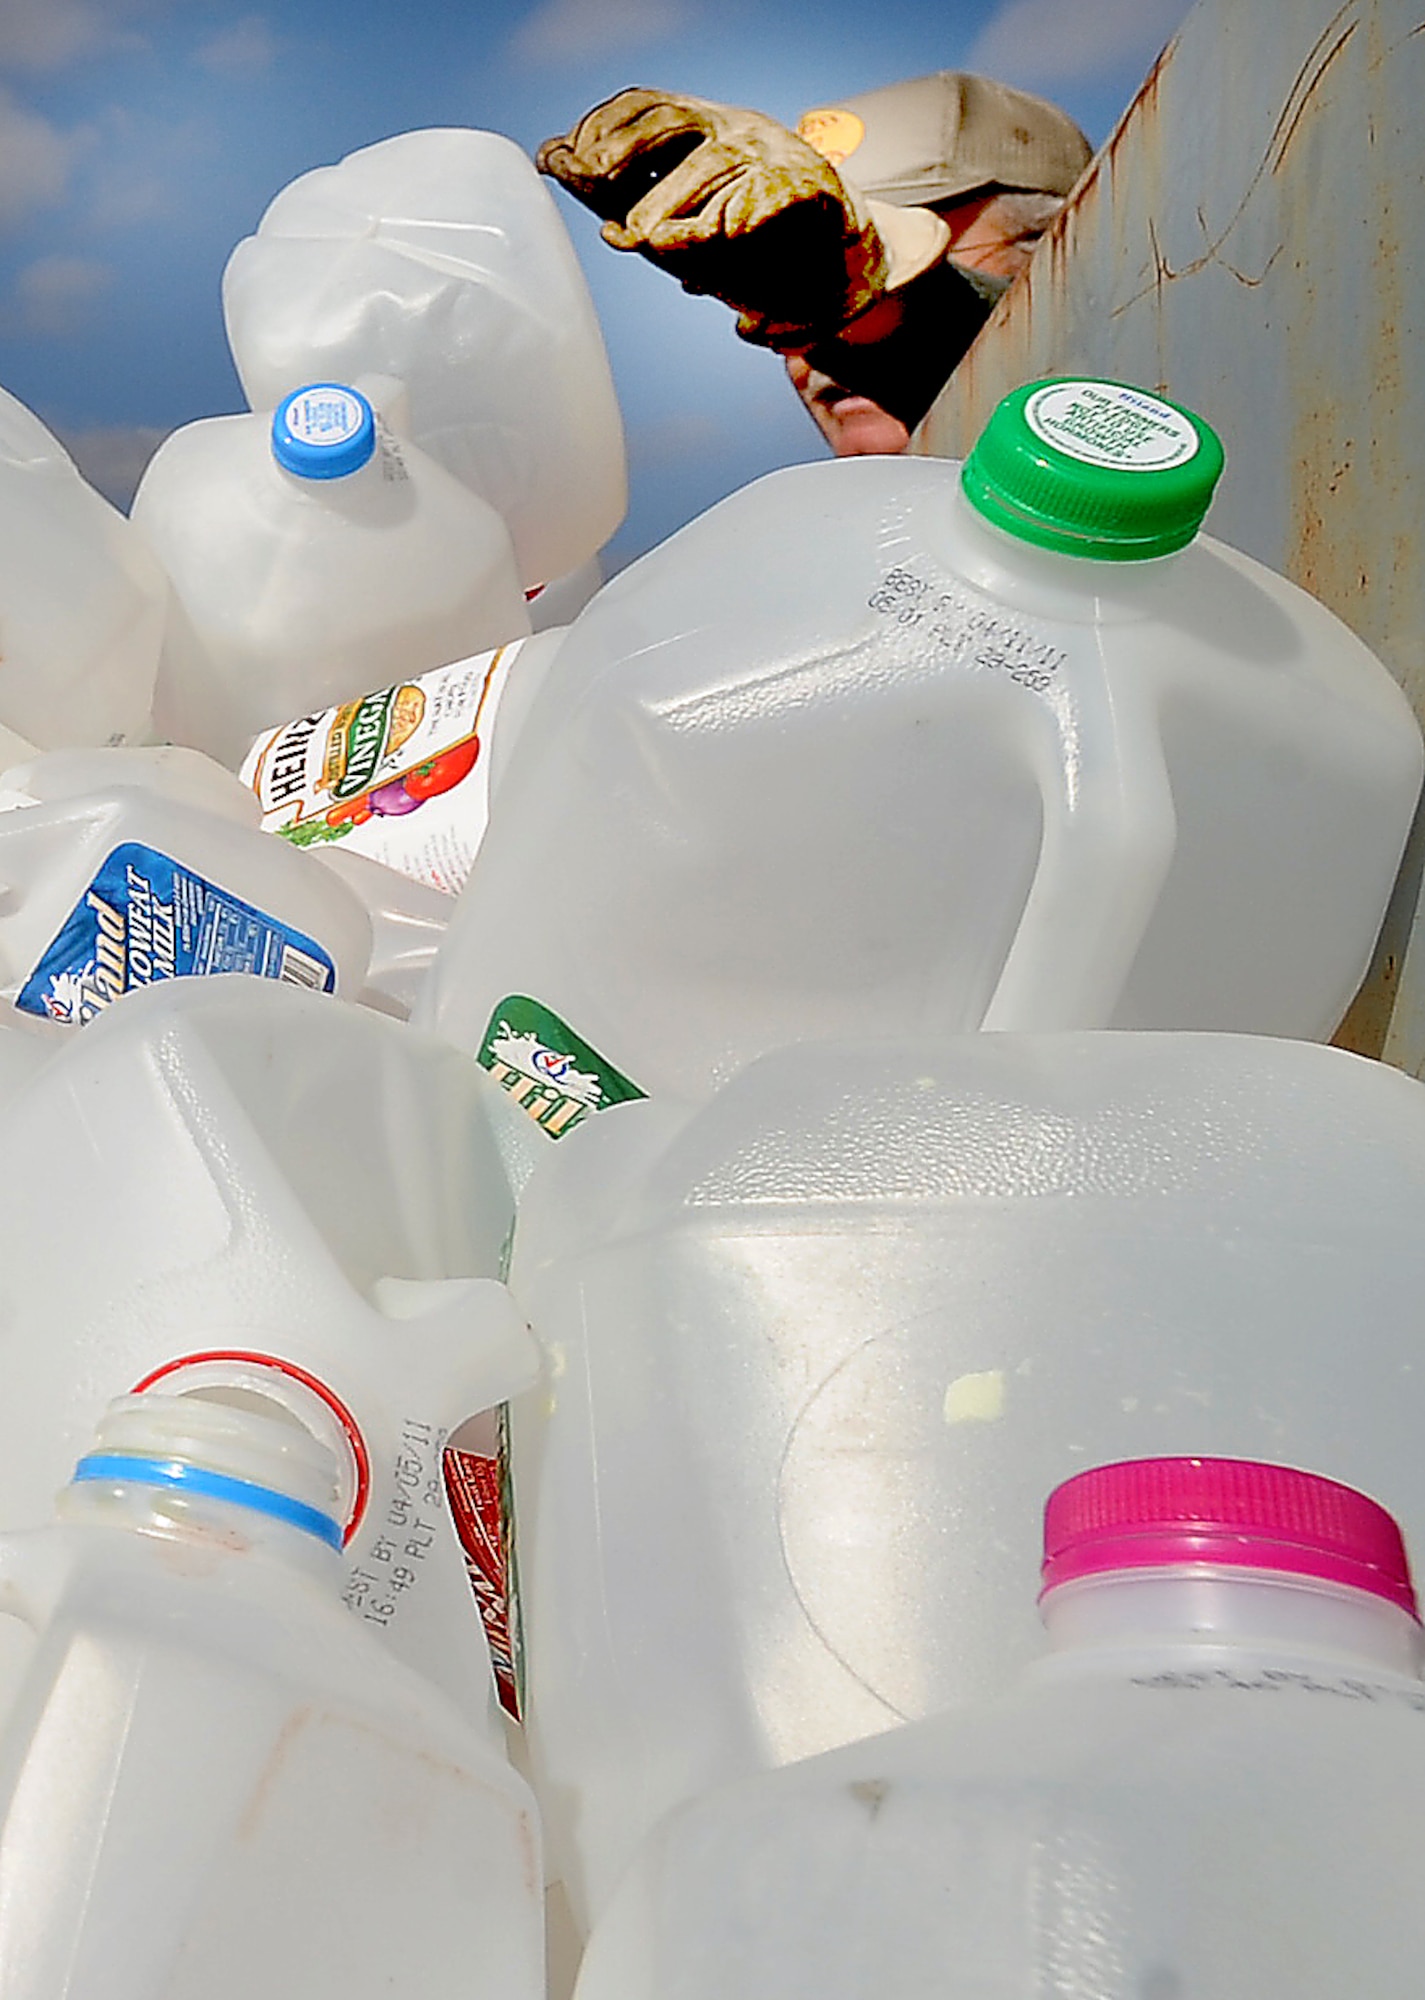 Milk Jugs - Napa Recycling and Waste Services